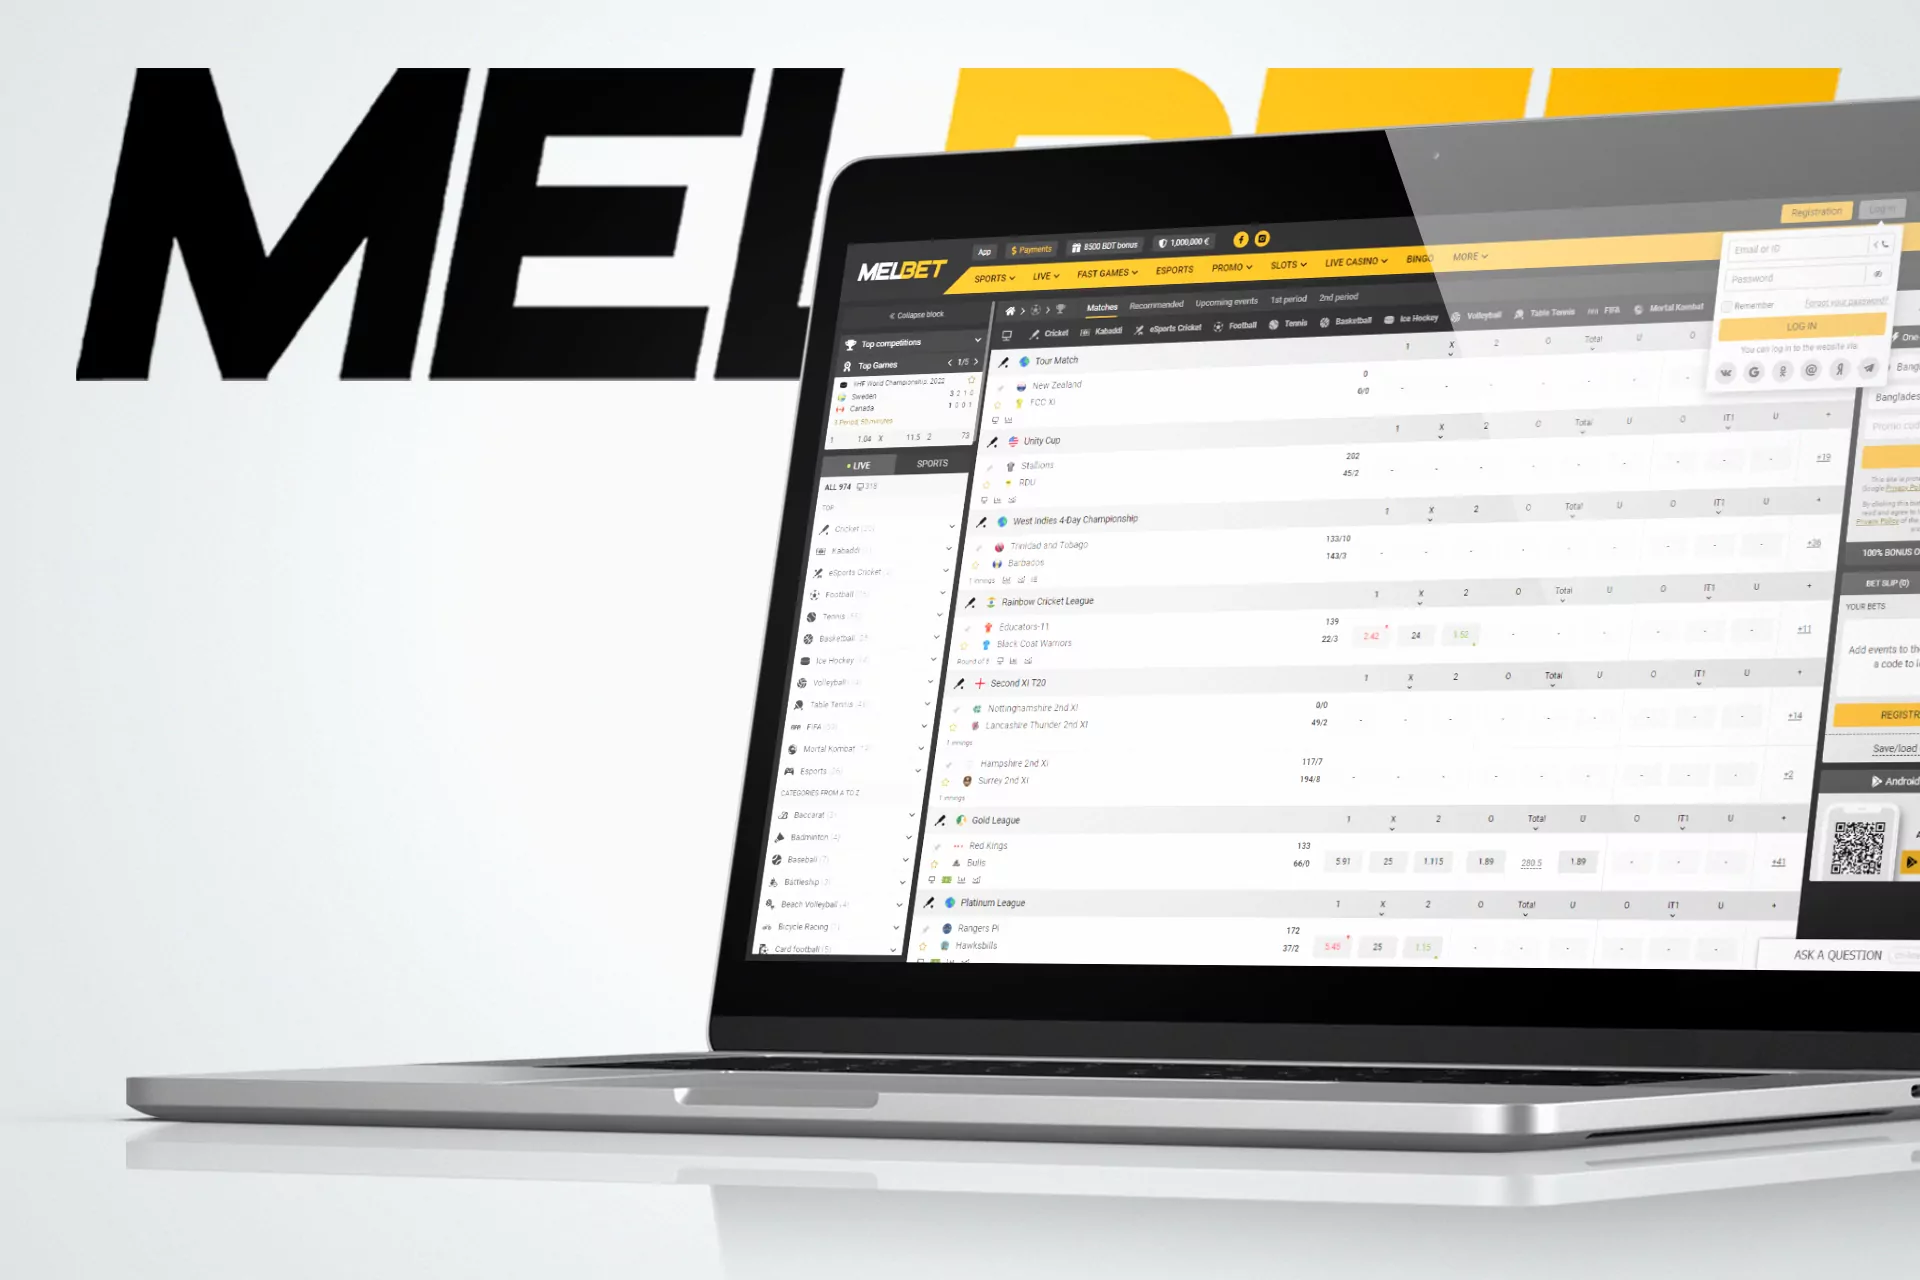 Melbet has an excellent and user-friendly online website for bettors and casino players.